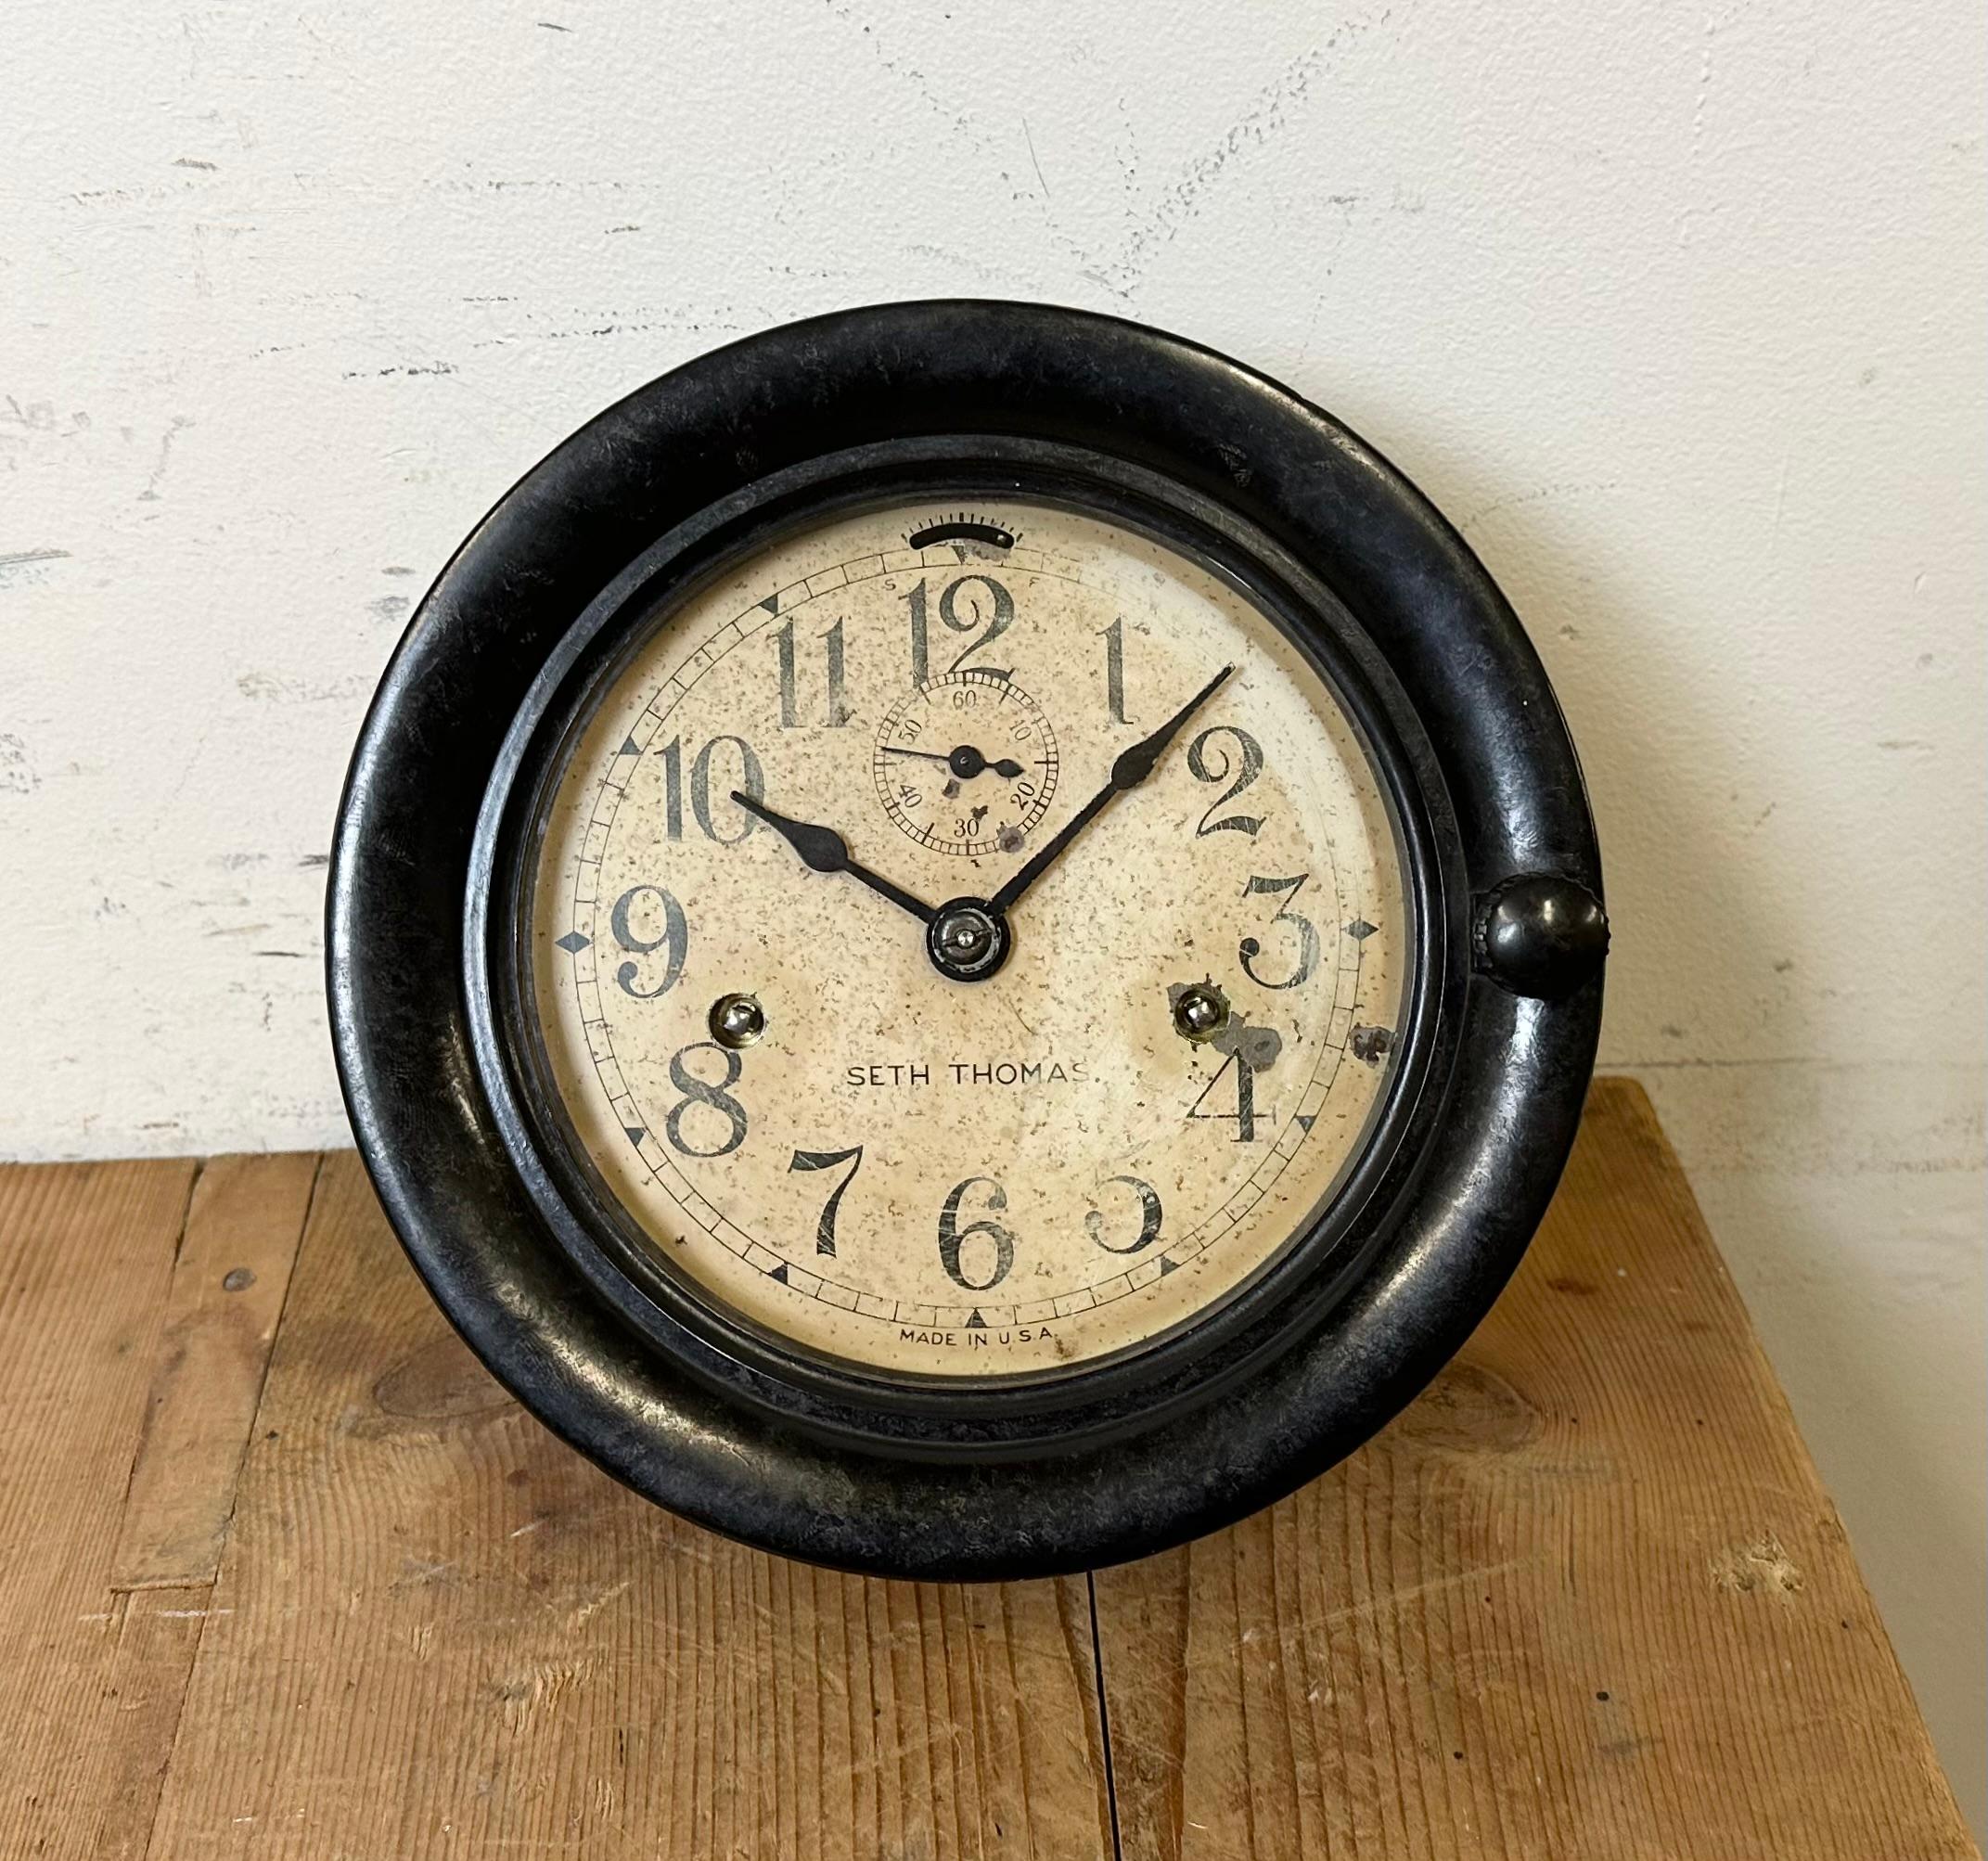  Vintage Mechanical Bakelite Maritime Wall Clock from Seth Thomas, 1950s In Fair Condition For Sale In Kojetice, CZ